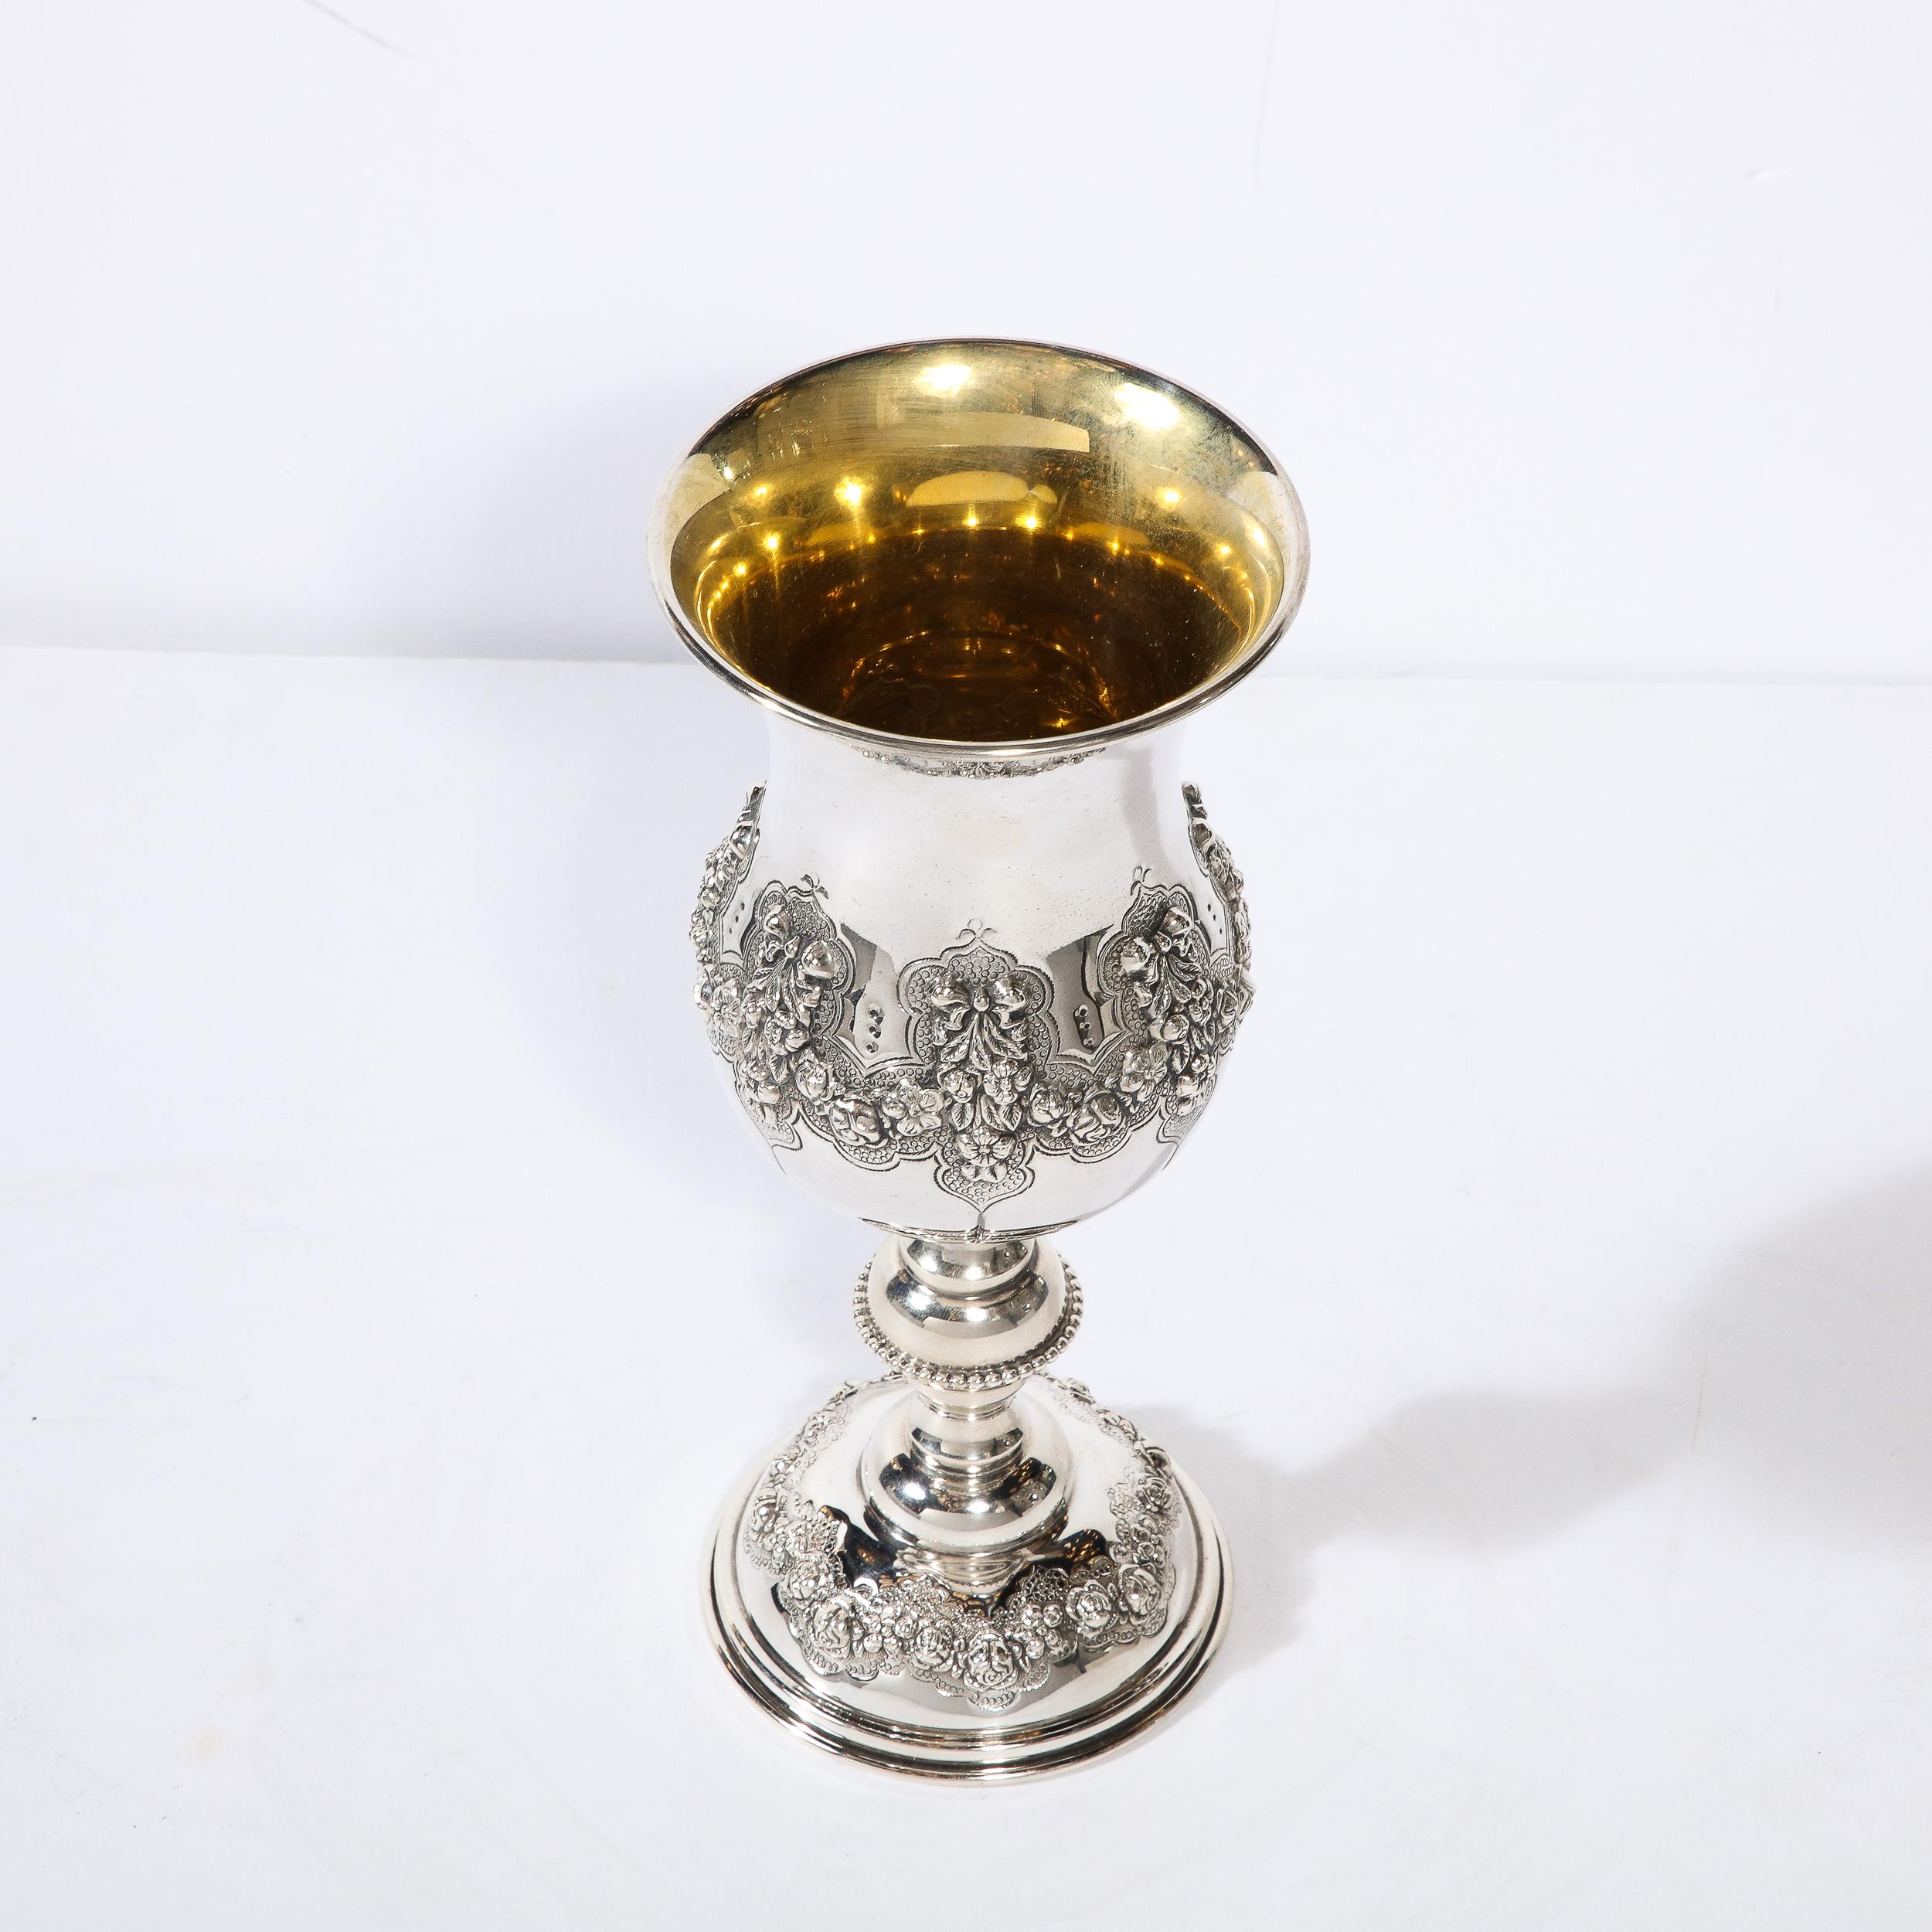 Monumental Sterling  Kiddish Goblet with Repousse Designs  by Hadad Brothers For Sale 1